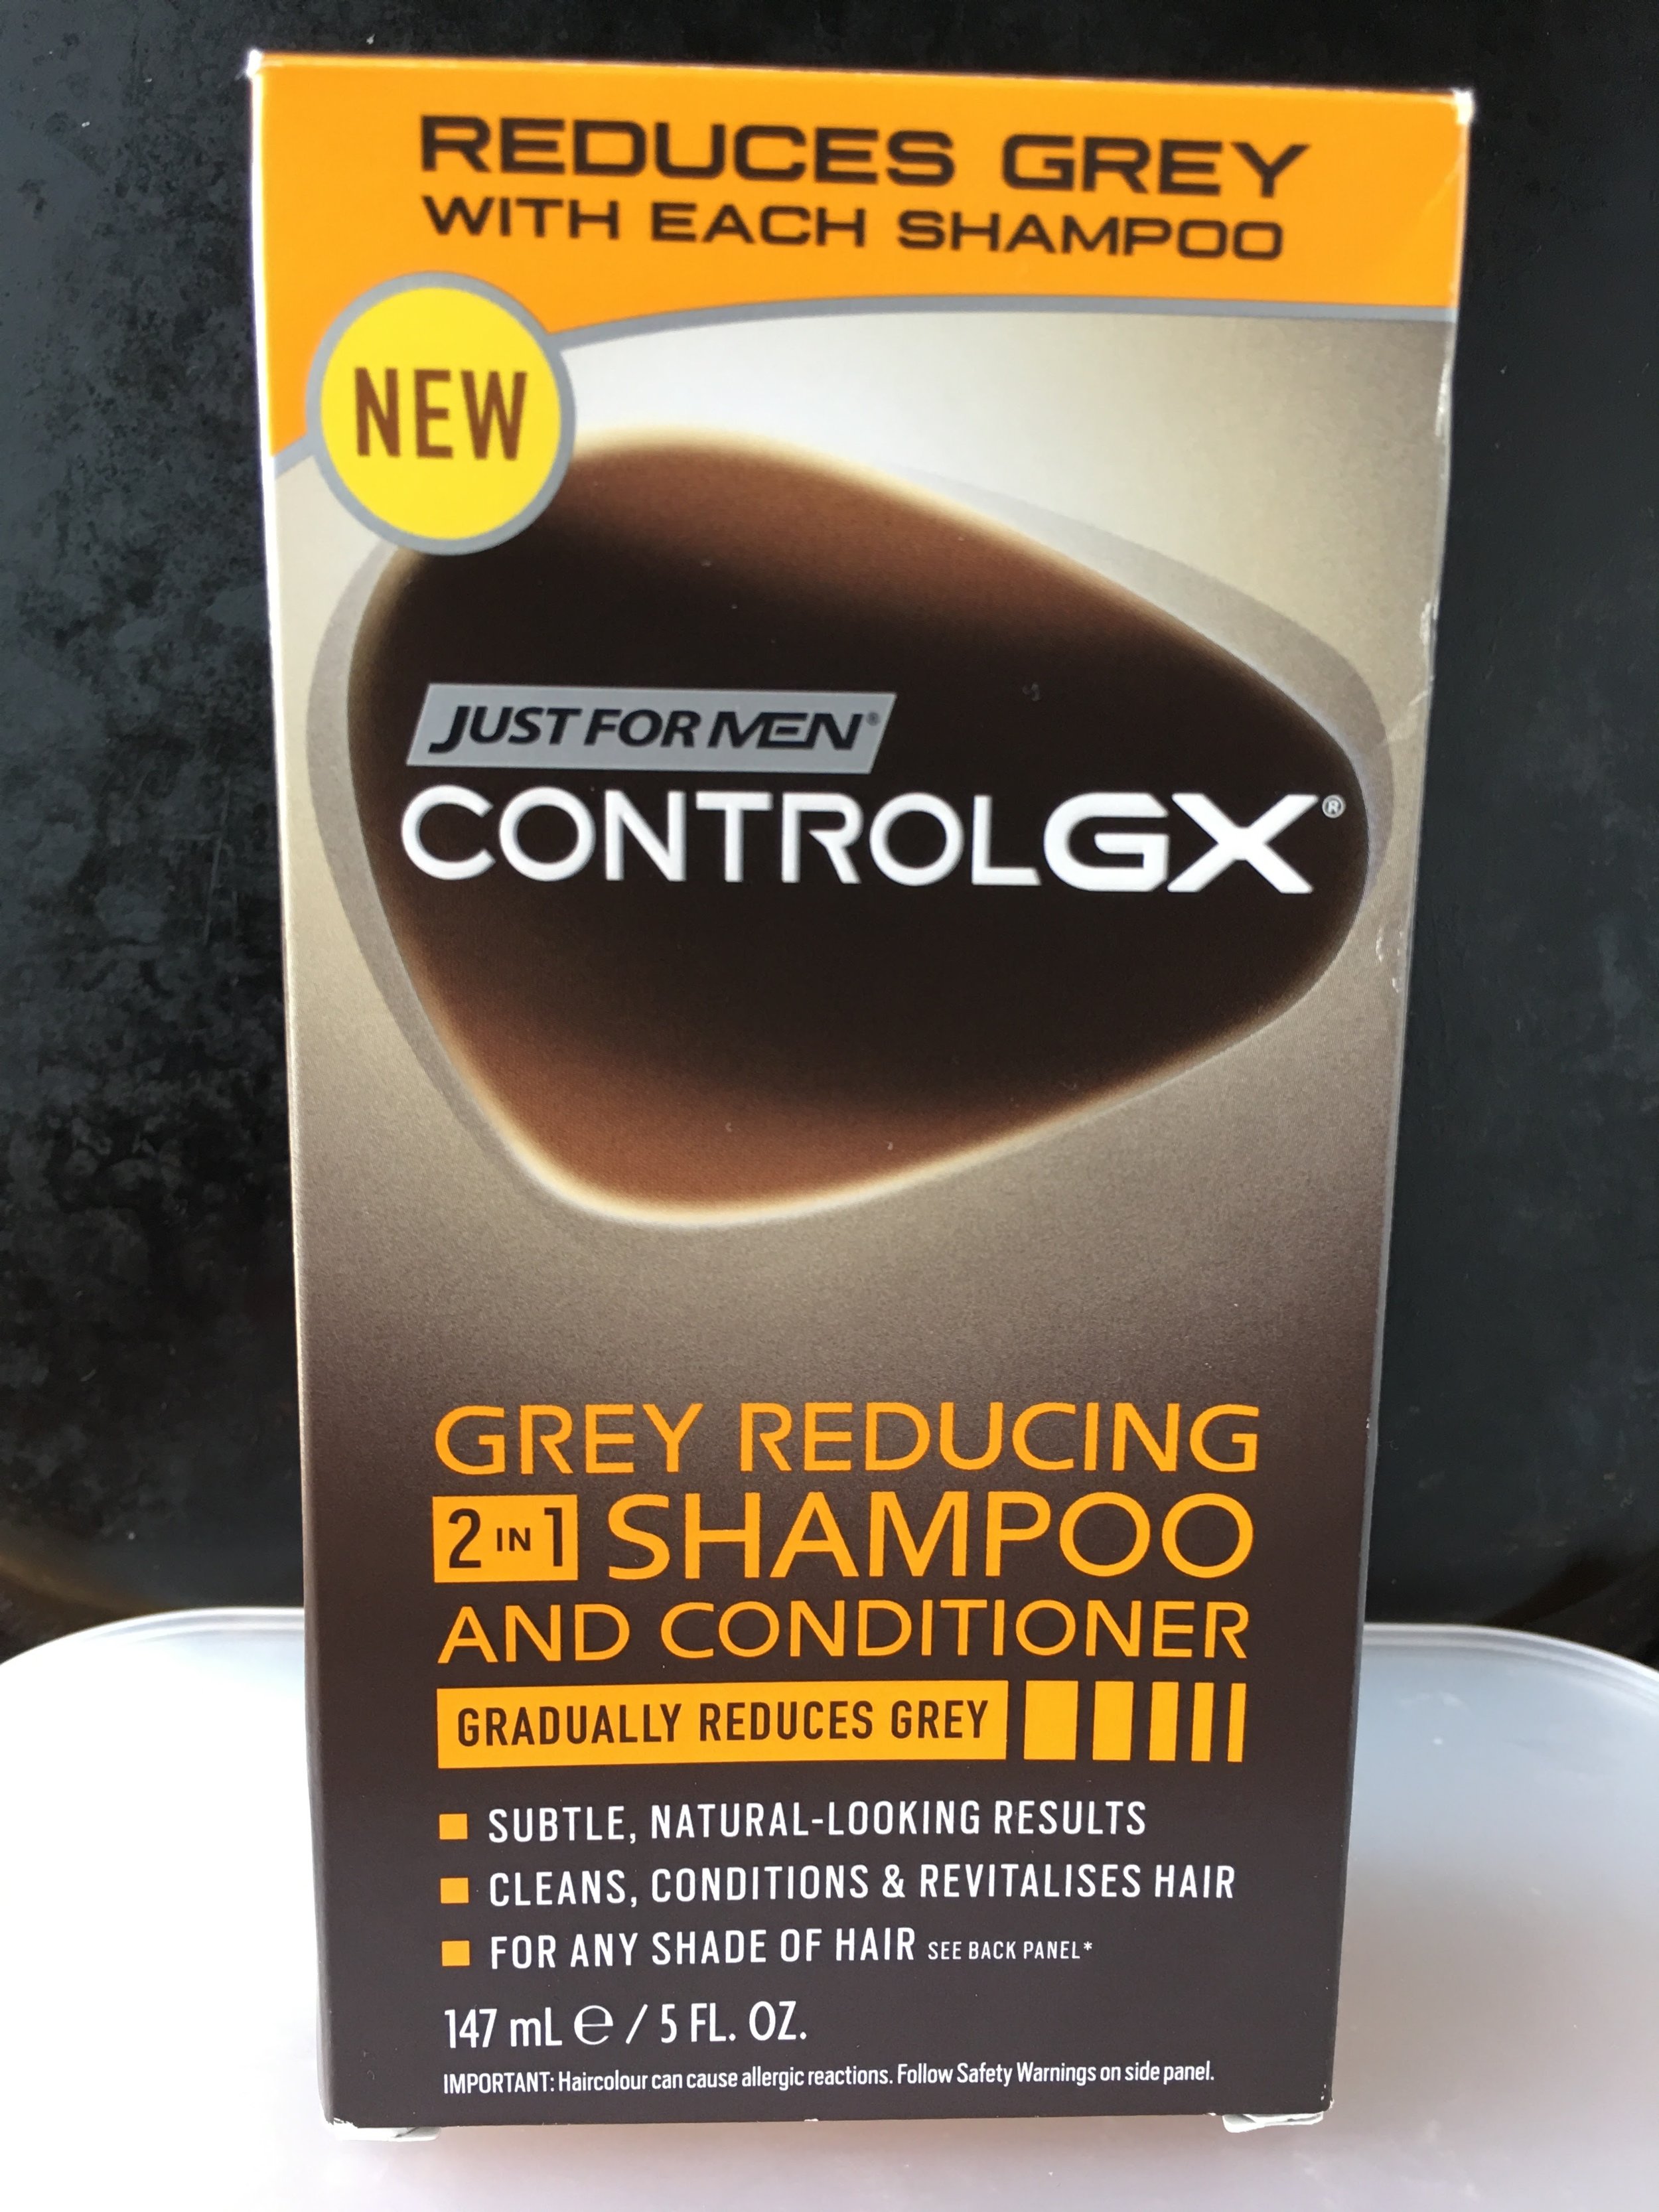 How to use Just For Men Control GX Grey Reducing Shampoo? — dapper & groomed